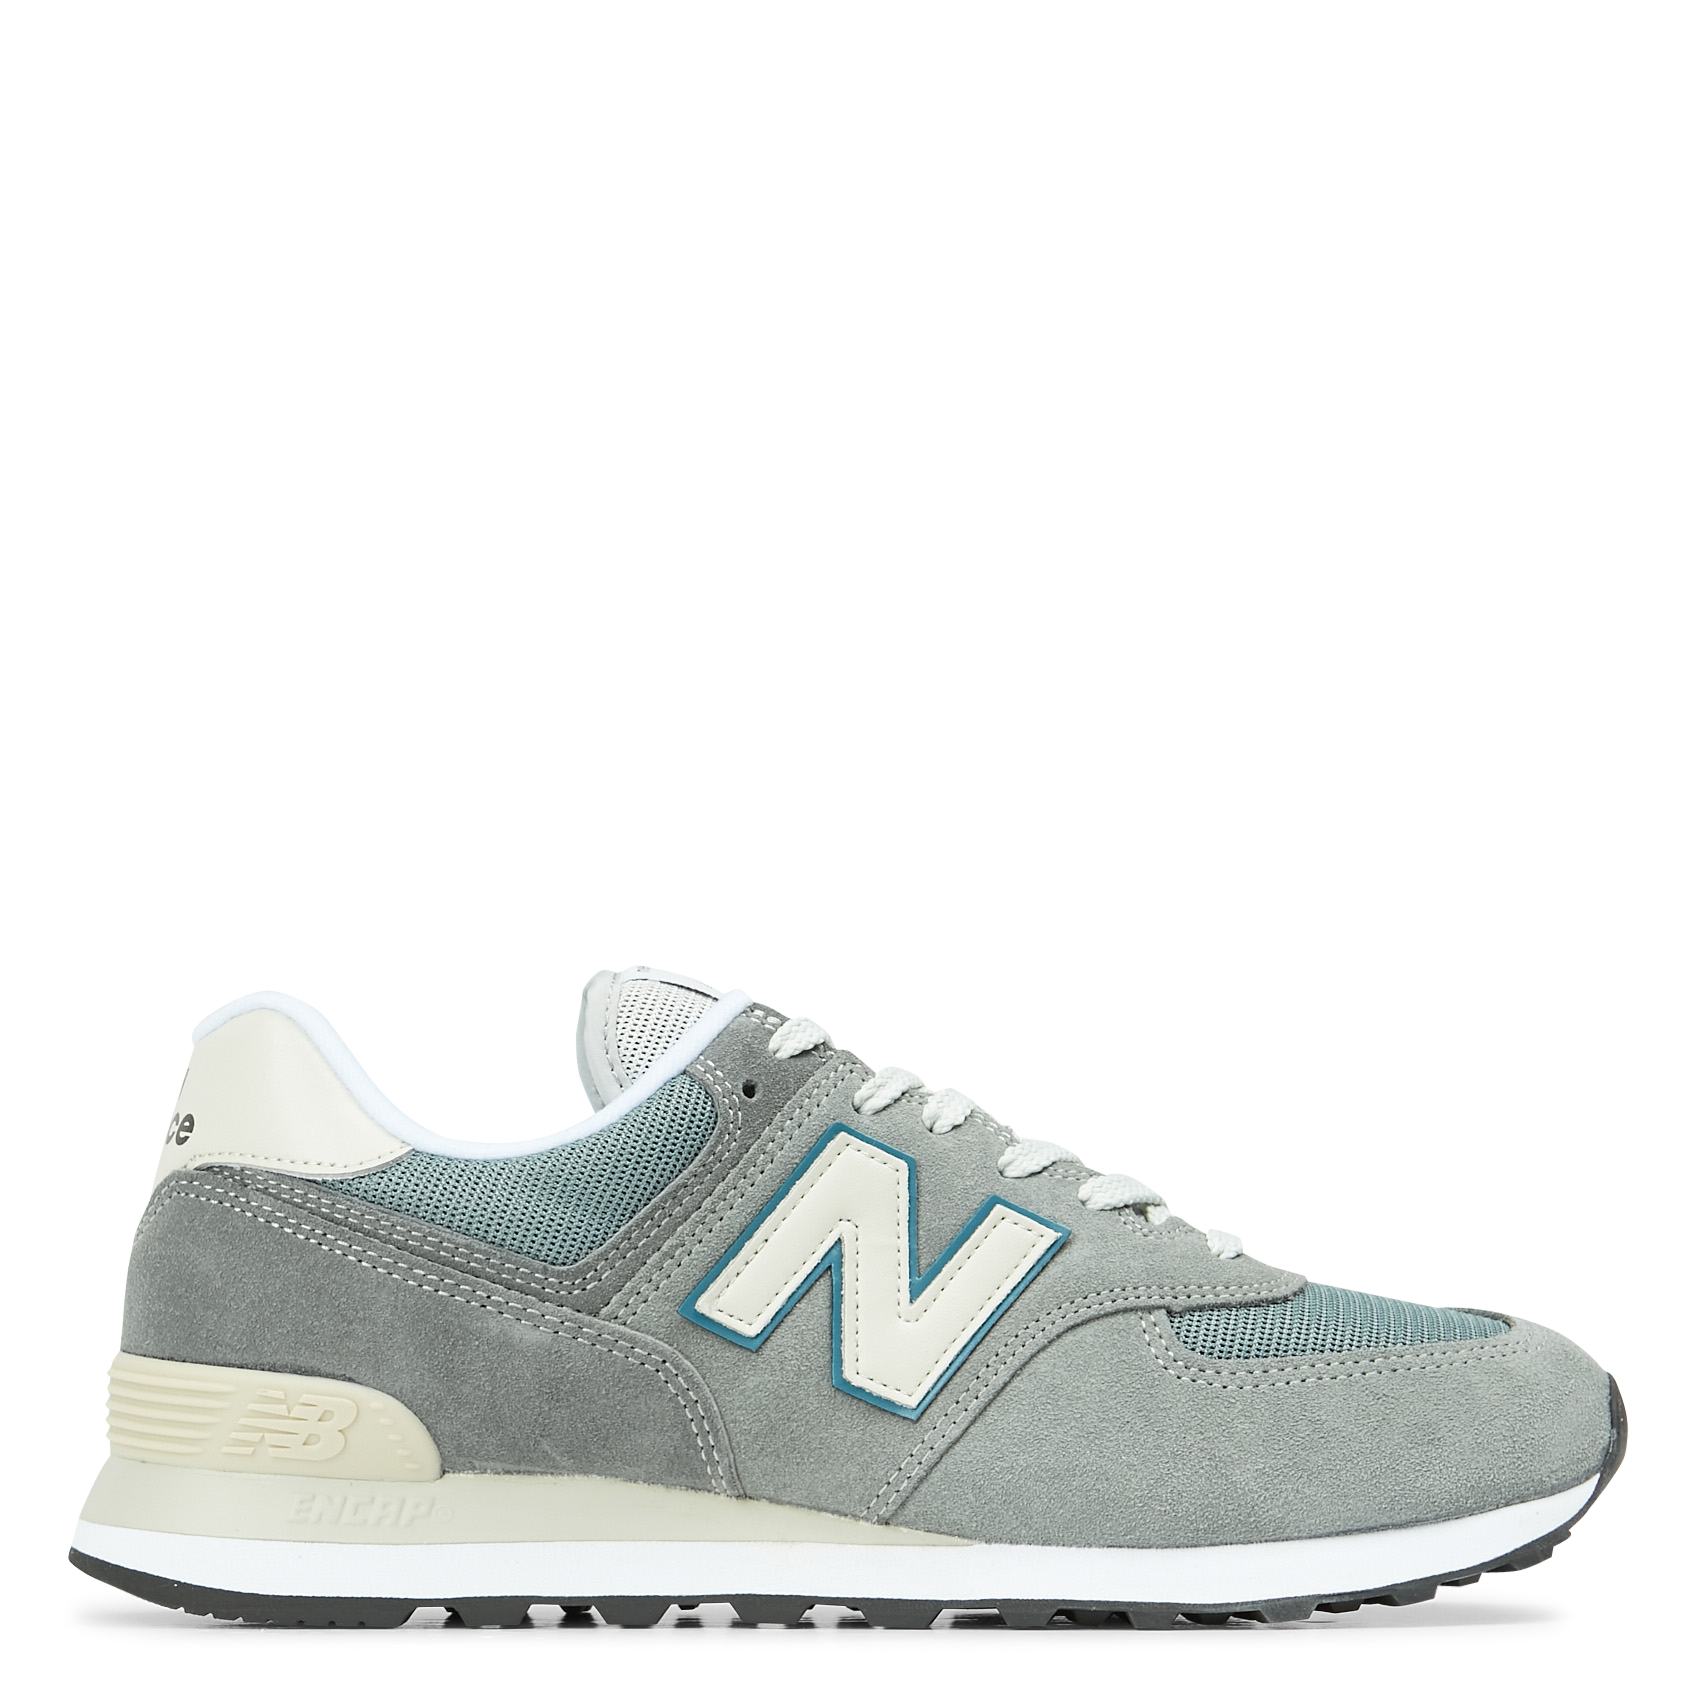 New Balance 574 Sneakers Grey New 